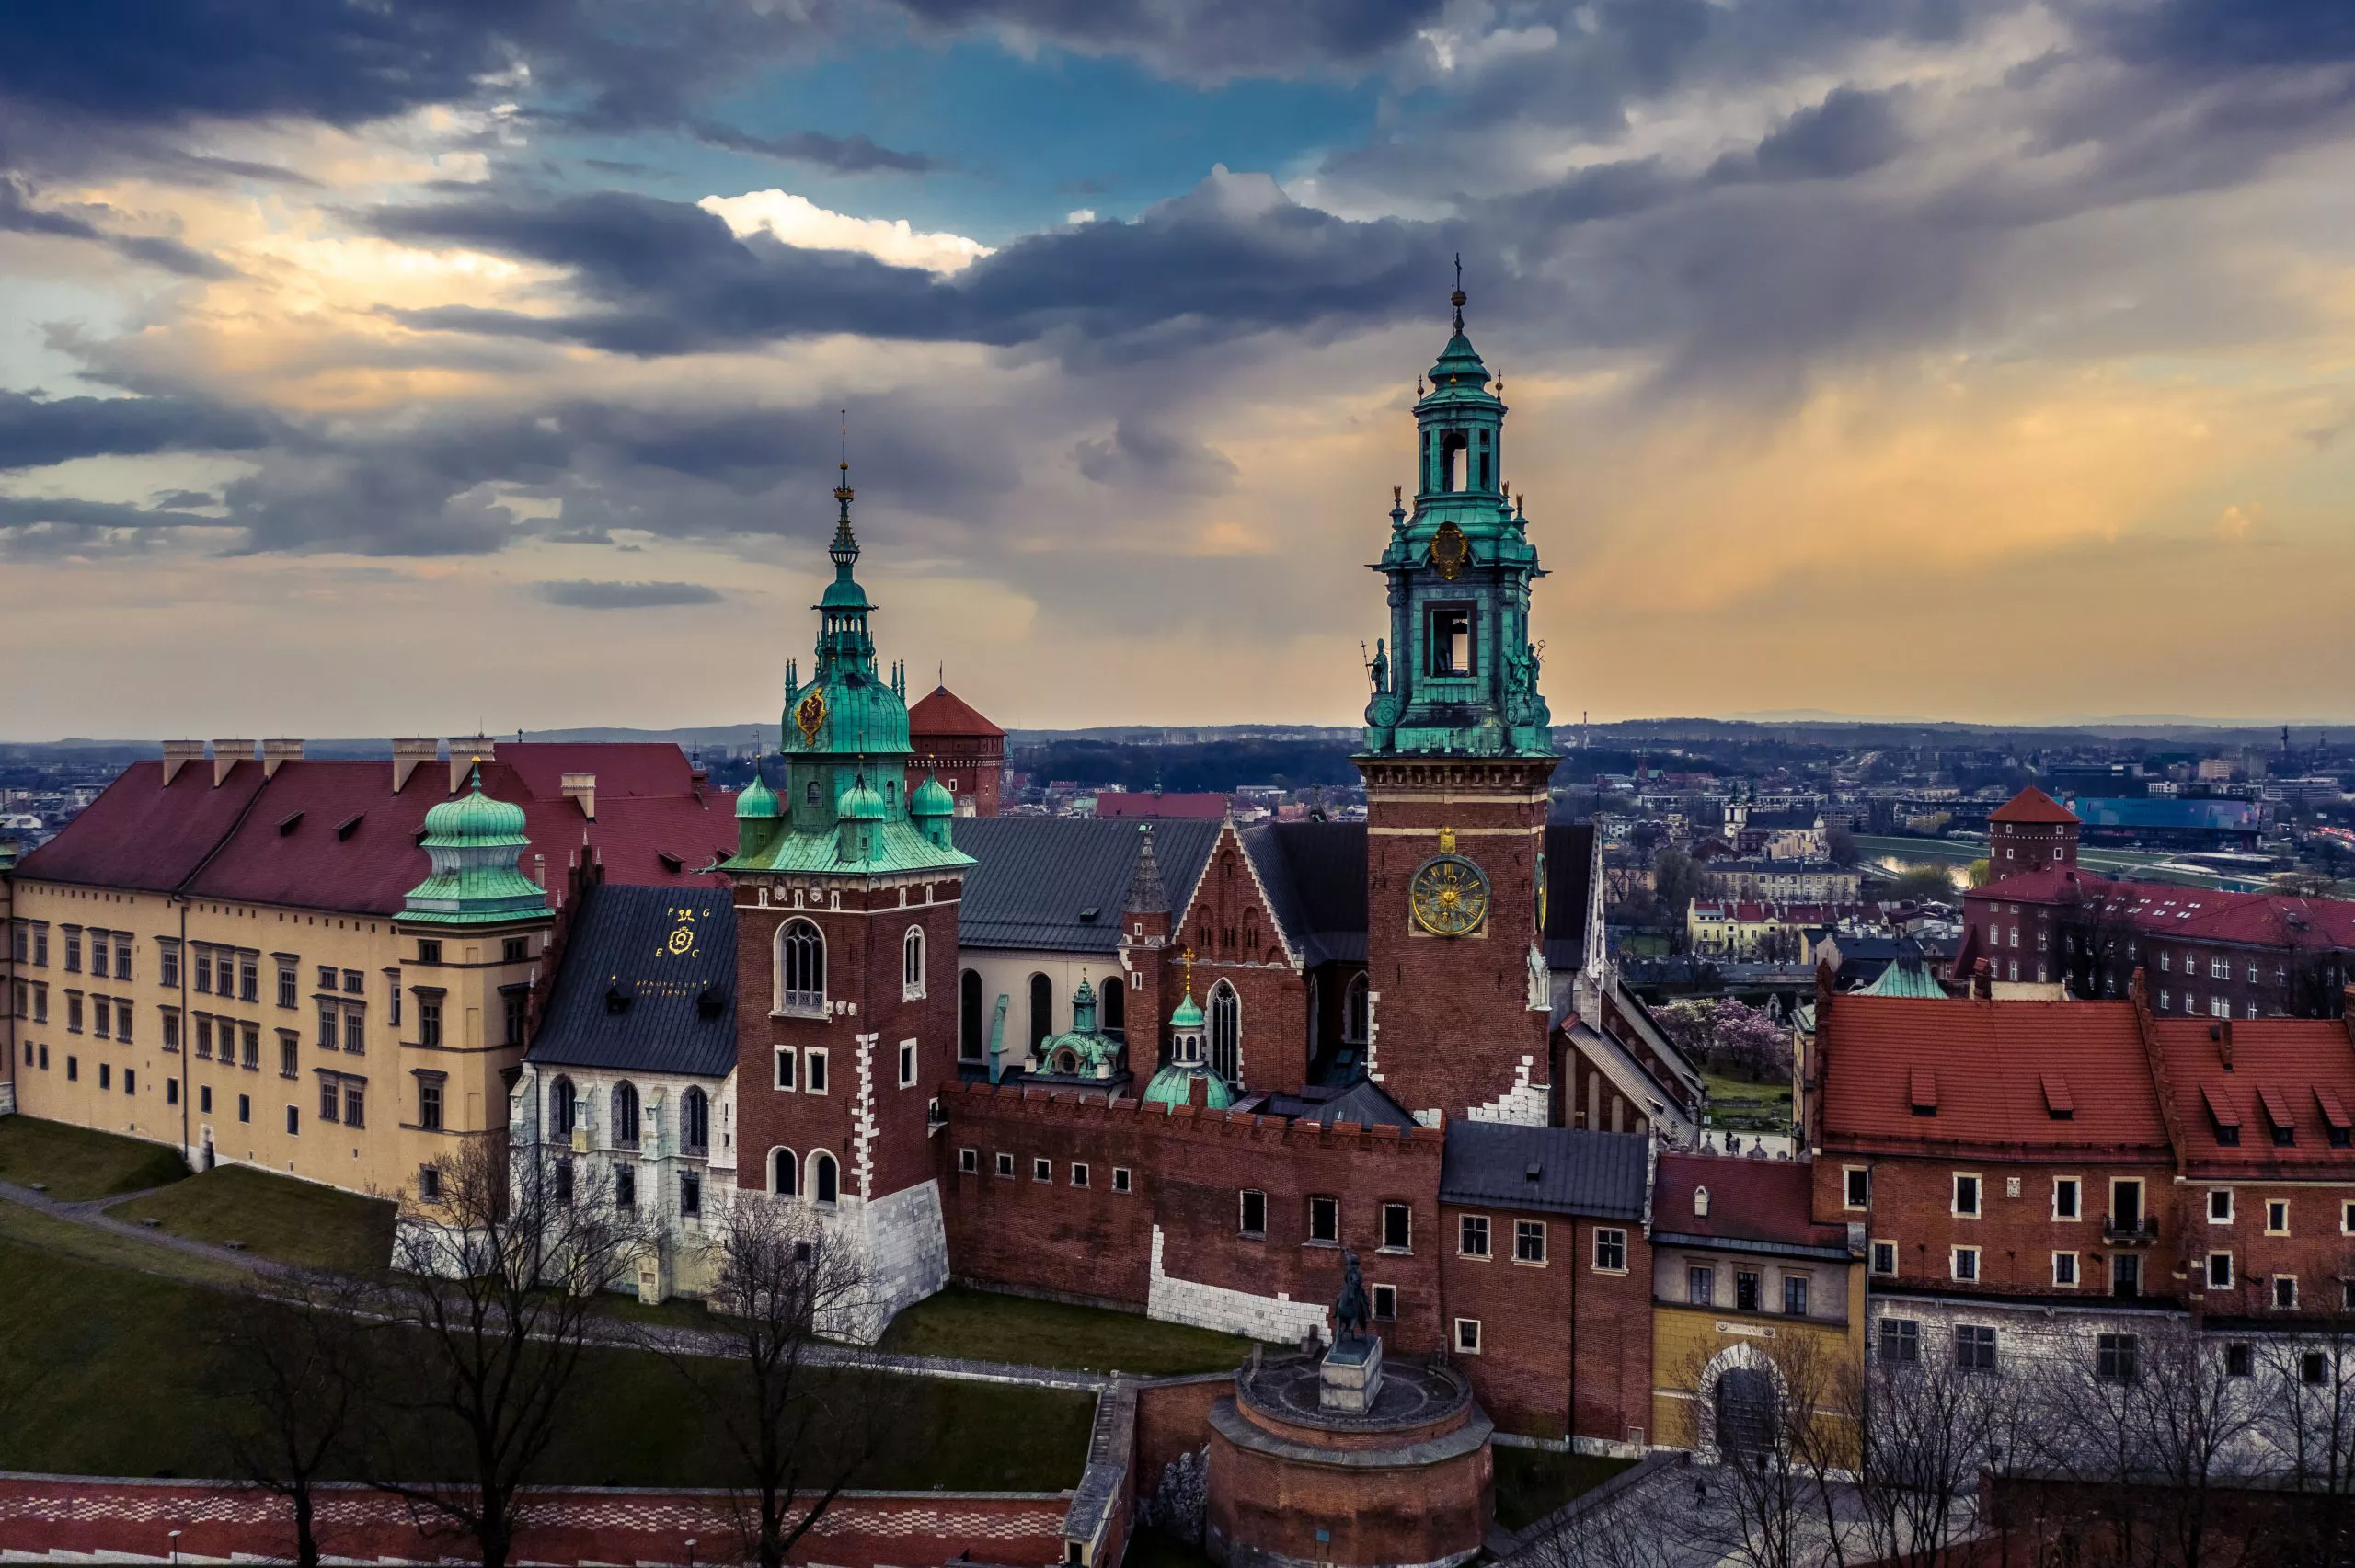 A bird’s eye view of Wawel Hill. The brick and limestone walls of the cathedral with its towers boasting tall patinised spires dwarf both the Gothic houses of the same material on the left, and the wing of the castle plastered white under a tall dark red roof on the left. The distant plane consists of the mottle of buildings under a dusky sky with sandy, blue, white and almost black clouds.